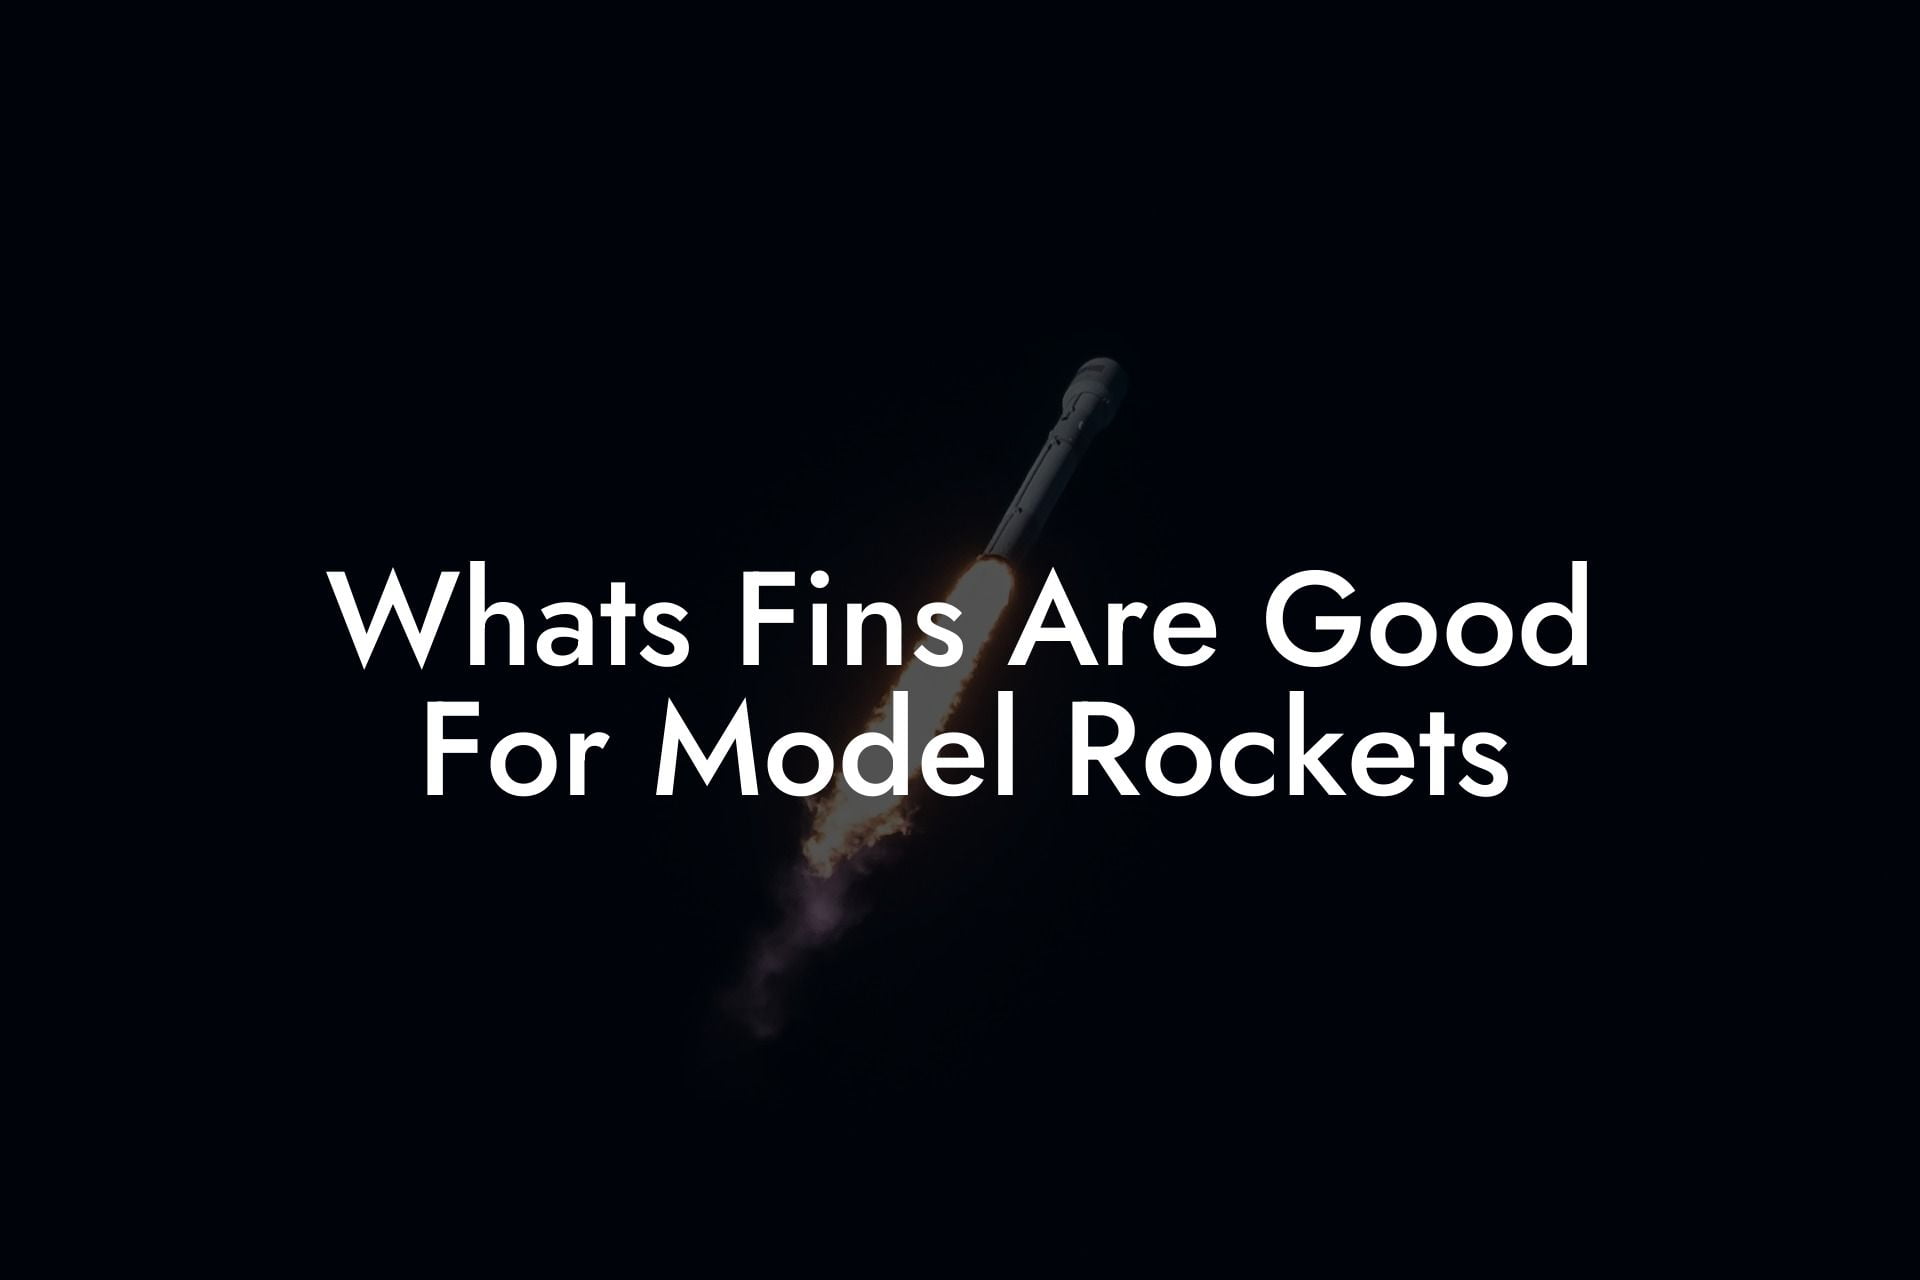 Whats Fins Are Good For Model Rockets